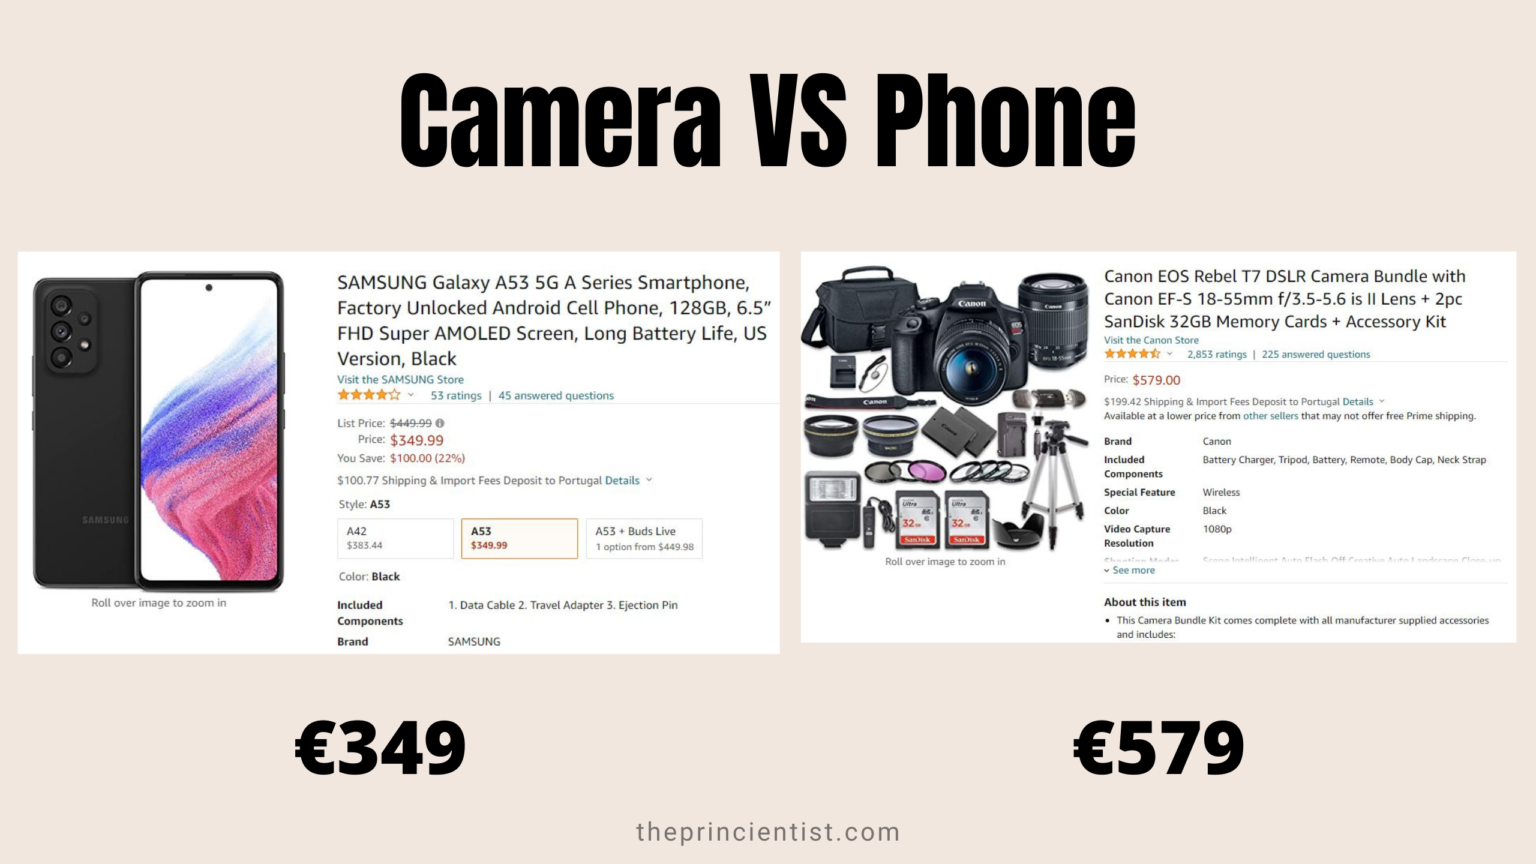 camera vc phone - difference in price. the phone is cheaper by 200 euros